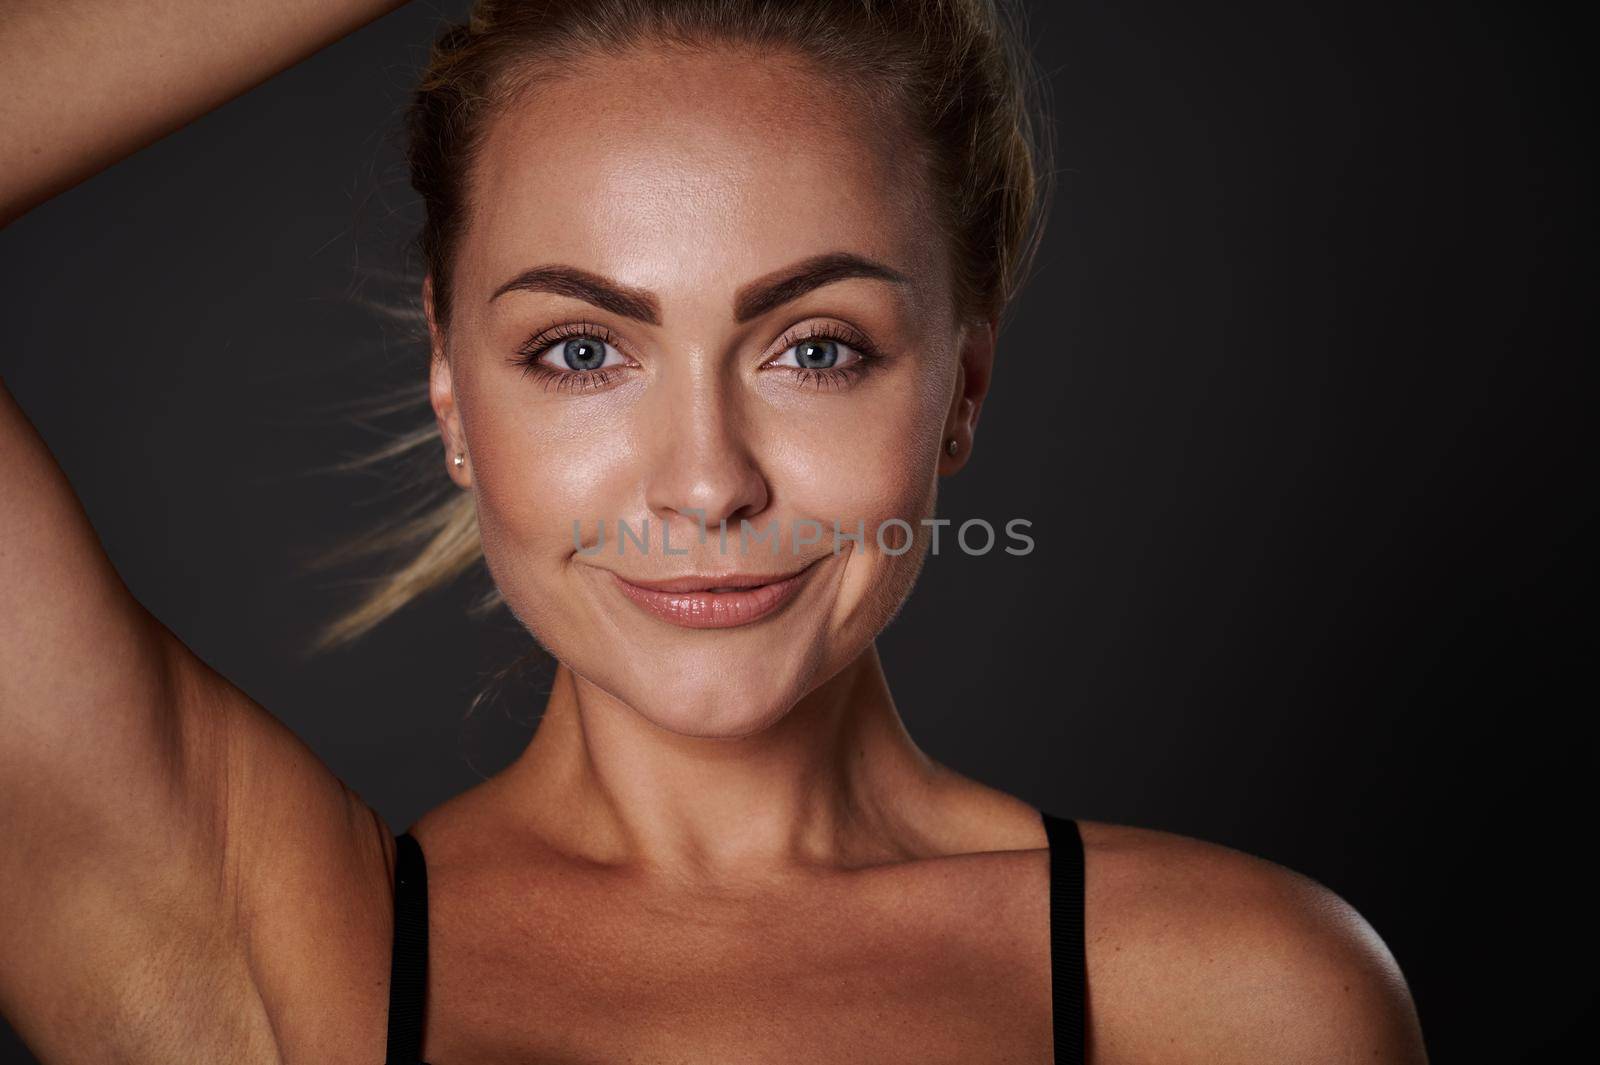 Close-up portrait of the face of a beautiful woman with fresh clean glowing tanned skin, smiling looking at camera isolated over dark background. Body positivity, self-acceptance, confidence concept